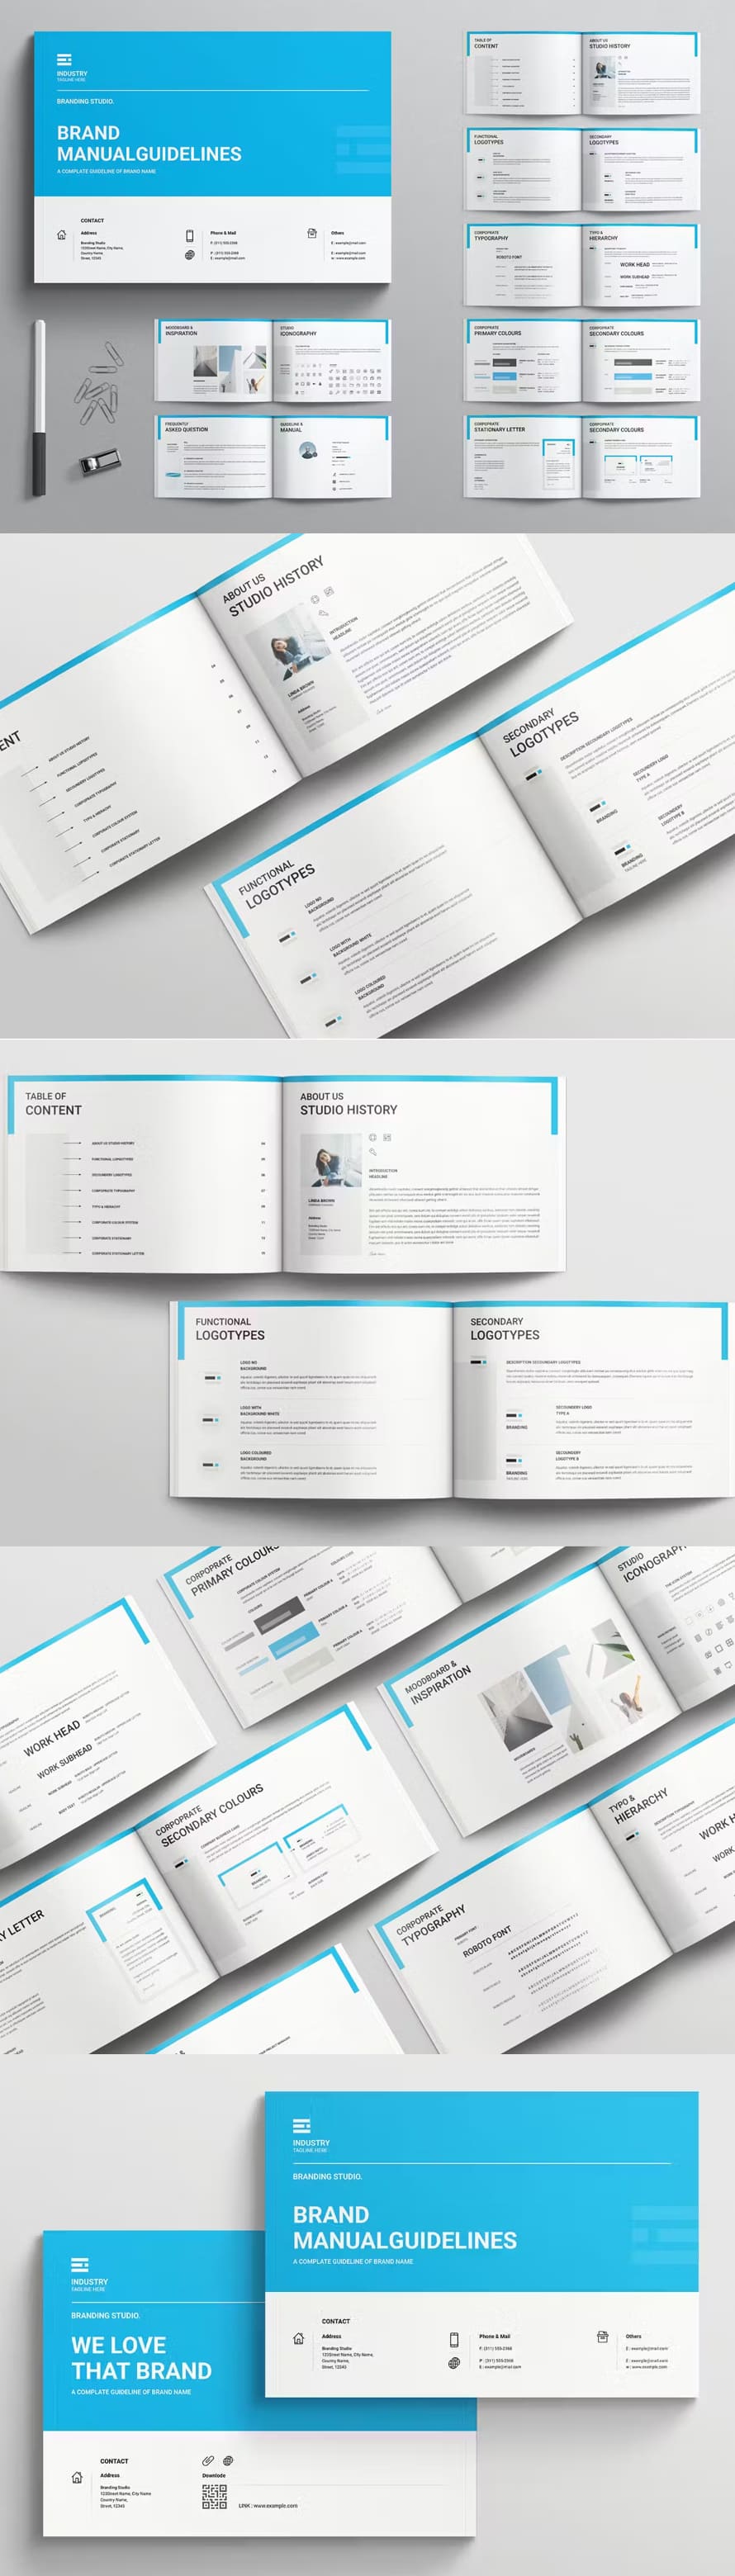 Brand Manual Guidelines Template Landscape